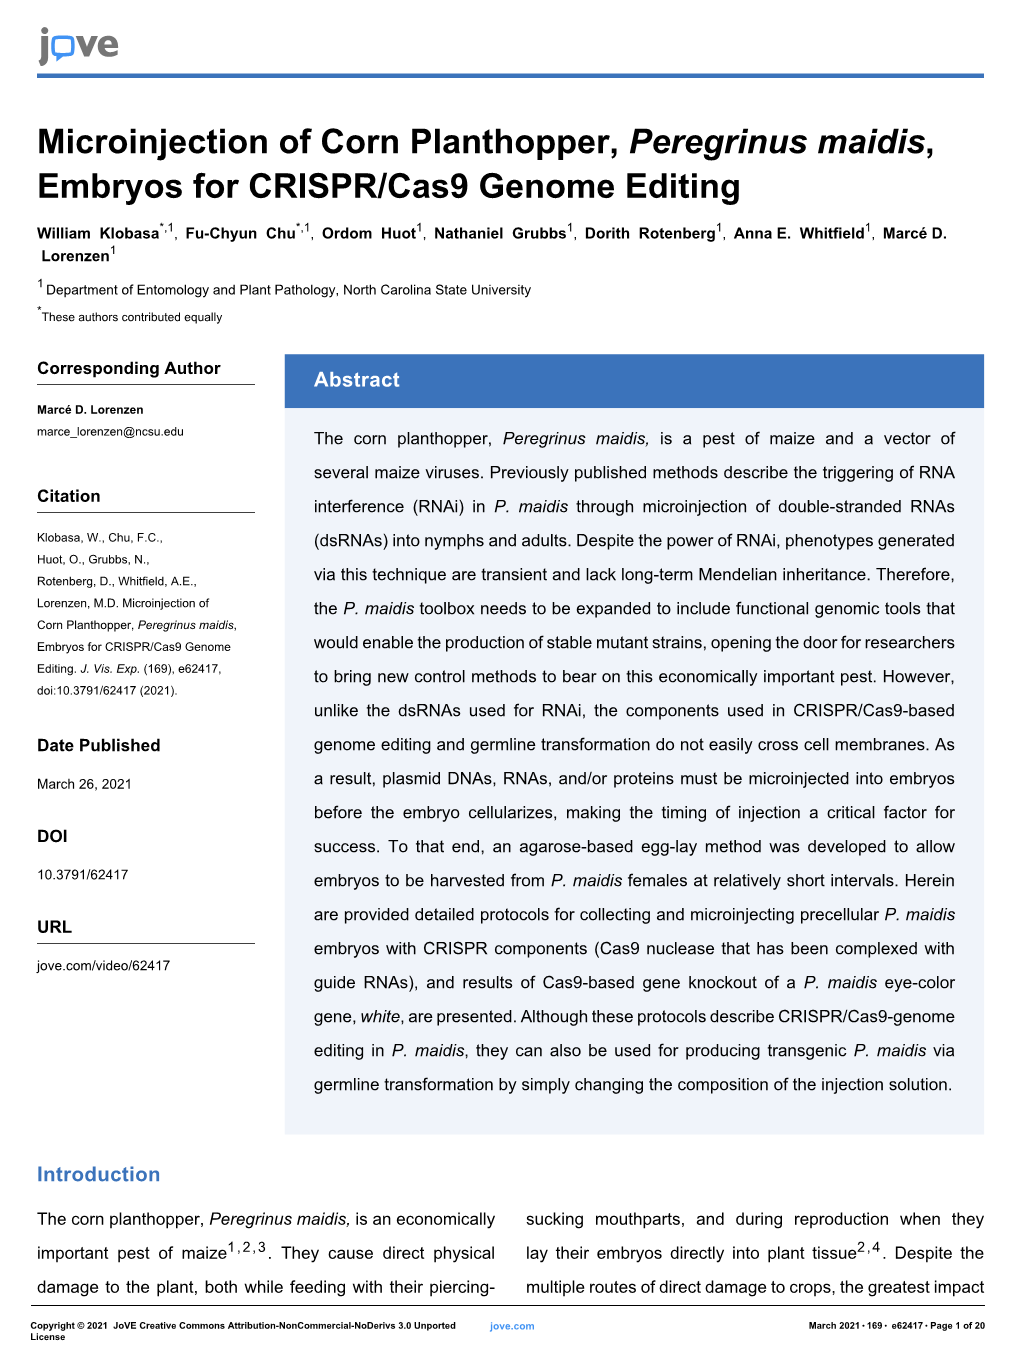 Microinjection of Corn Planthopper, Peregrinus Maidis, Embryos for CRISPR/Cas9 Genome Editing